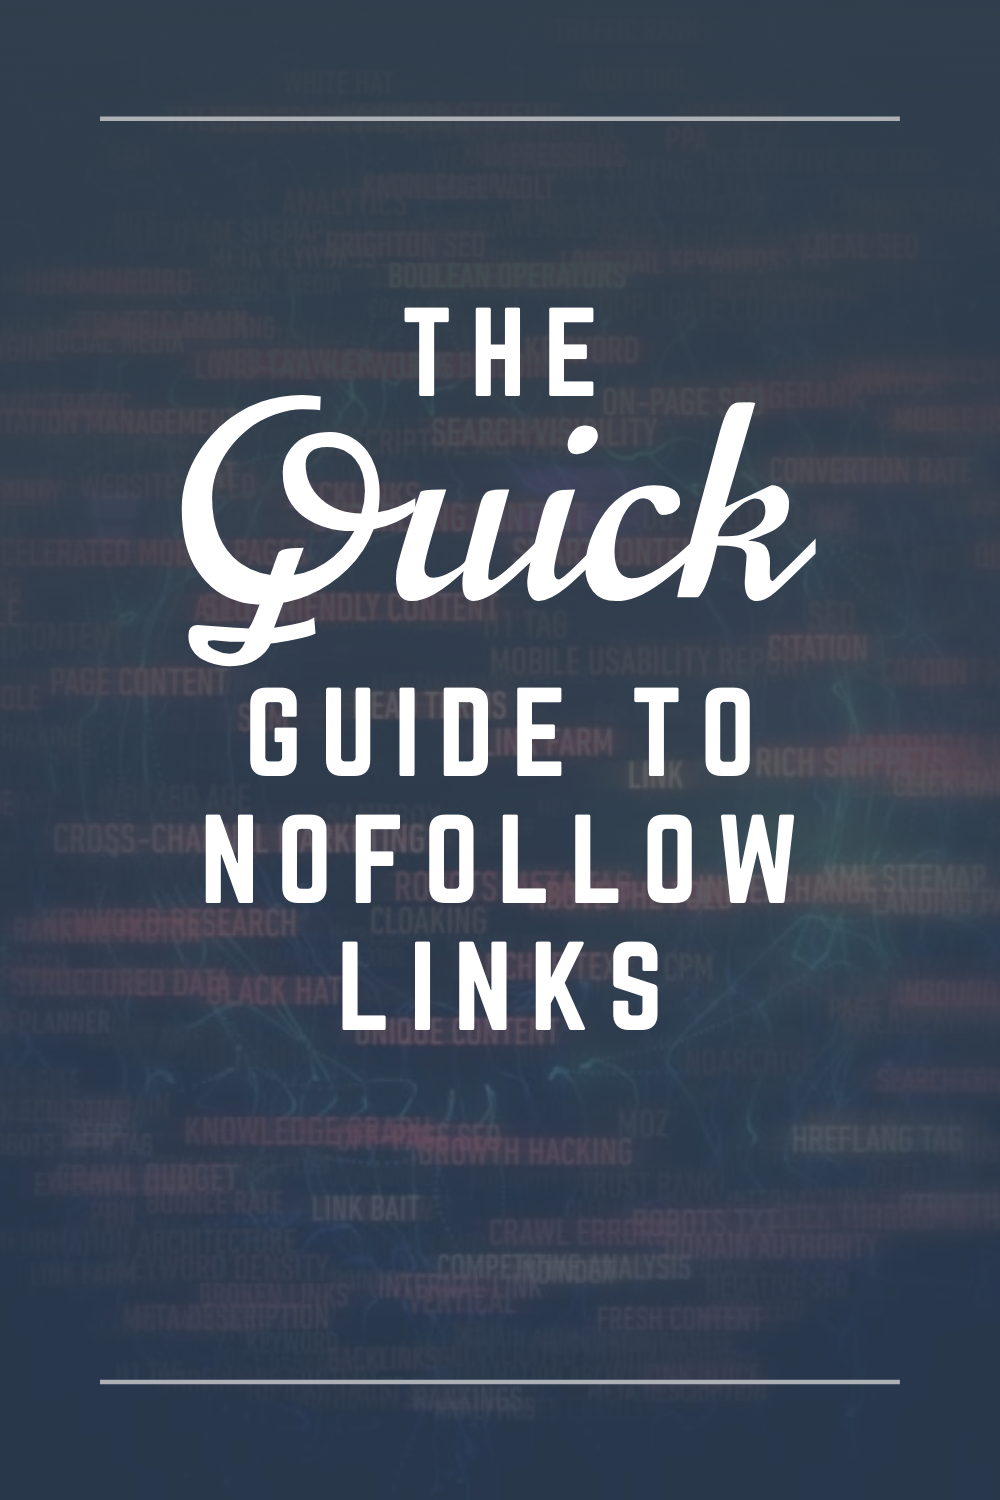 The quick guide to nofollow links by WebWiskee